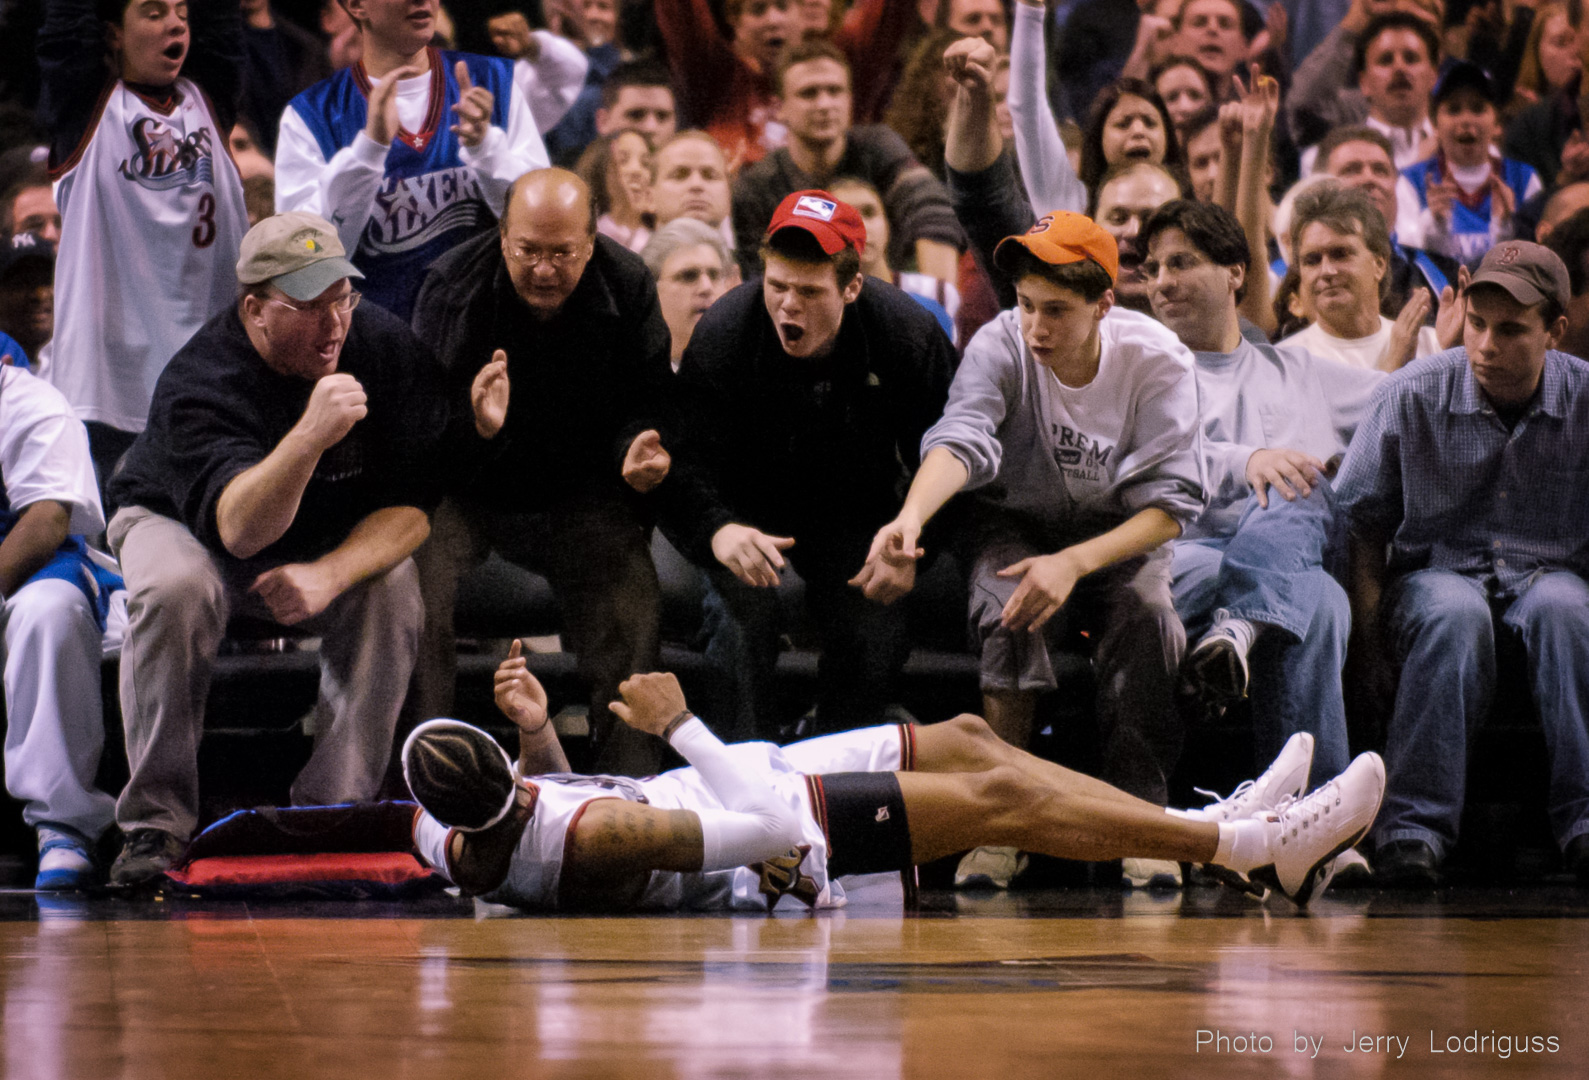 Sixers fans cheer for Allen Iverson who is flat on his back on the floor after being fouled while sinking a basket. Iverson made the free throw for a three point play. The Philadelphia 76ers faced the Detroit Pistons at the Wachovia Center in Philadelphia on Wednesday November 26, 2003.